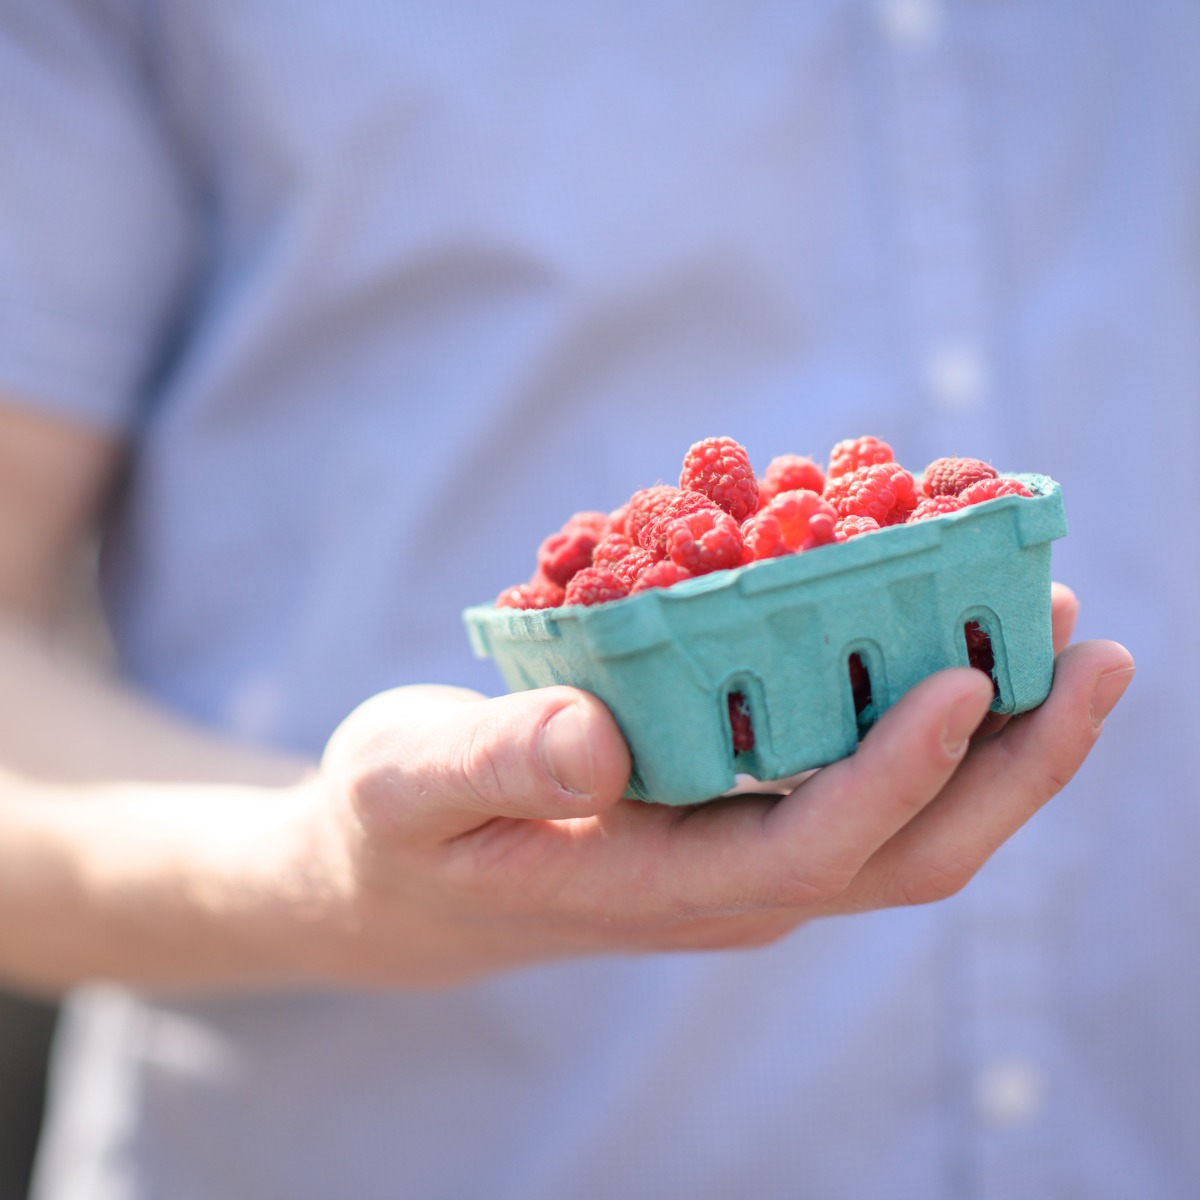 A hand holds a basket of ripe berries.